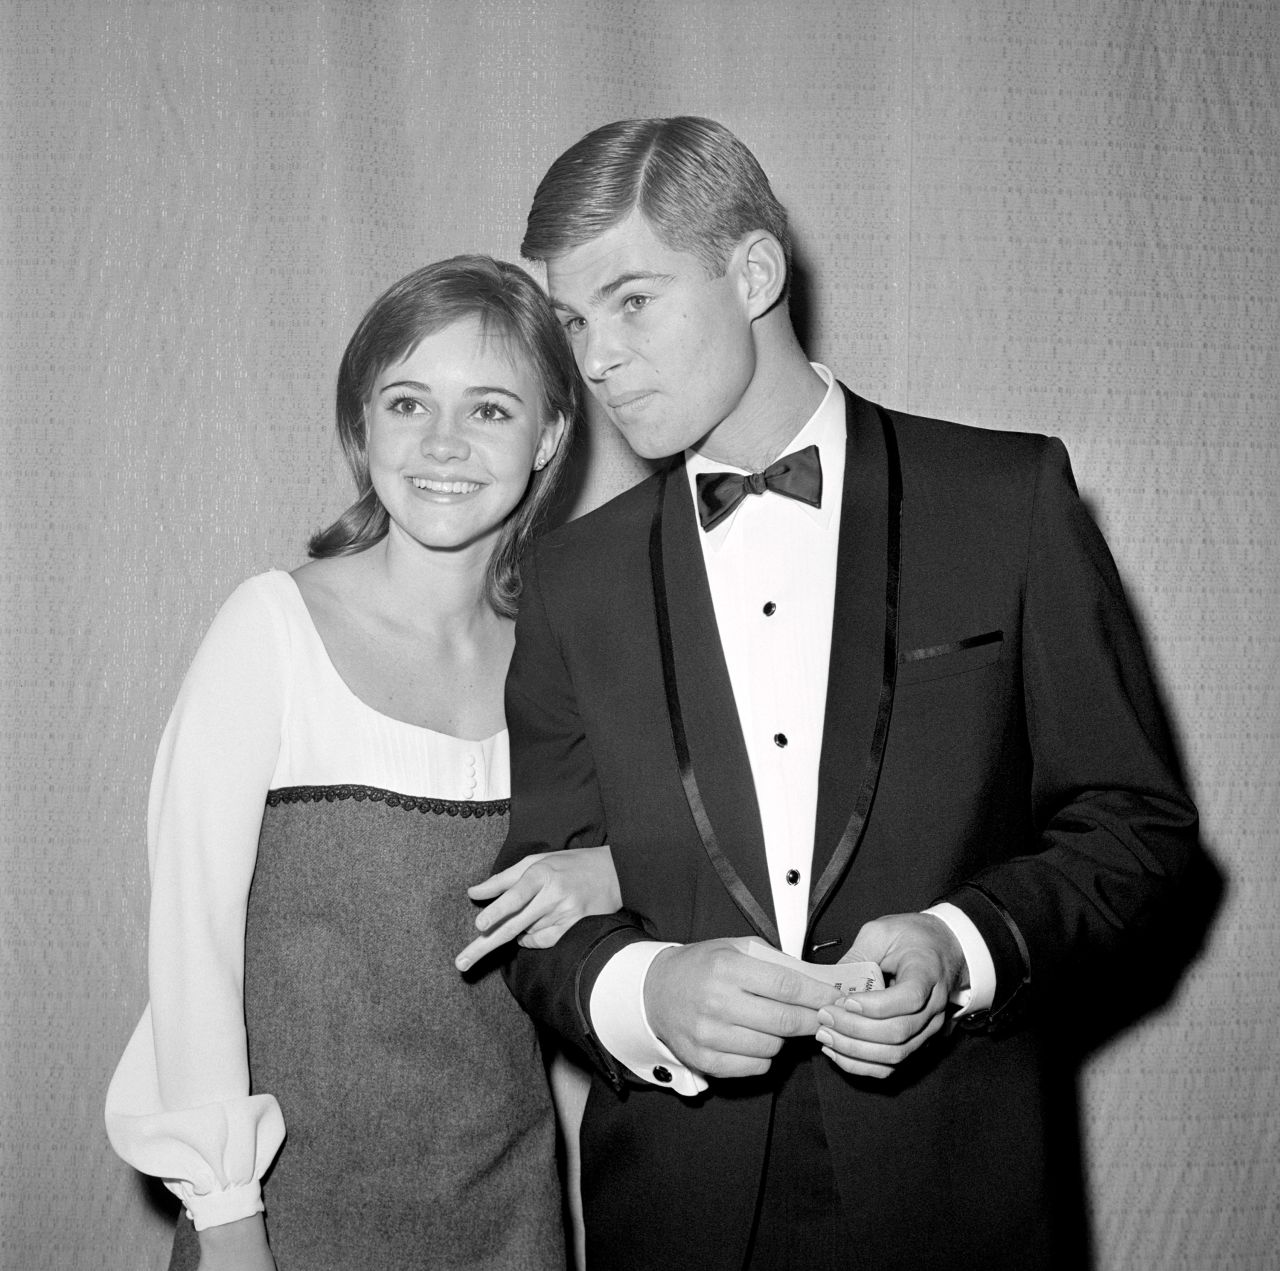 Field attends a film premiere with Steve Craig in 1965. The two were married from 1968 to 1975 and had two children together.